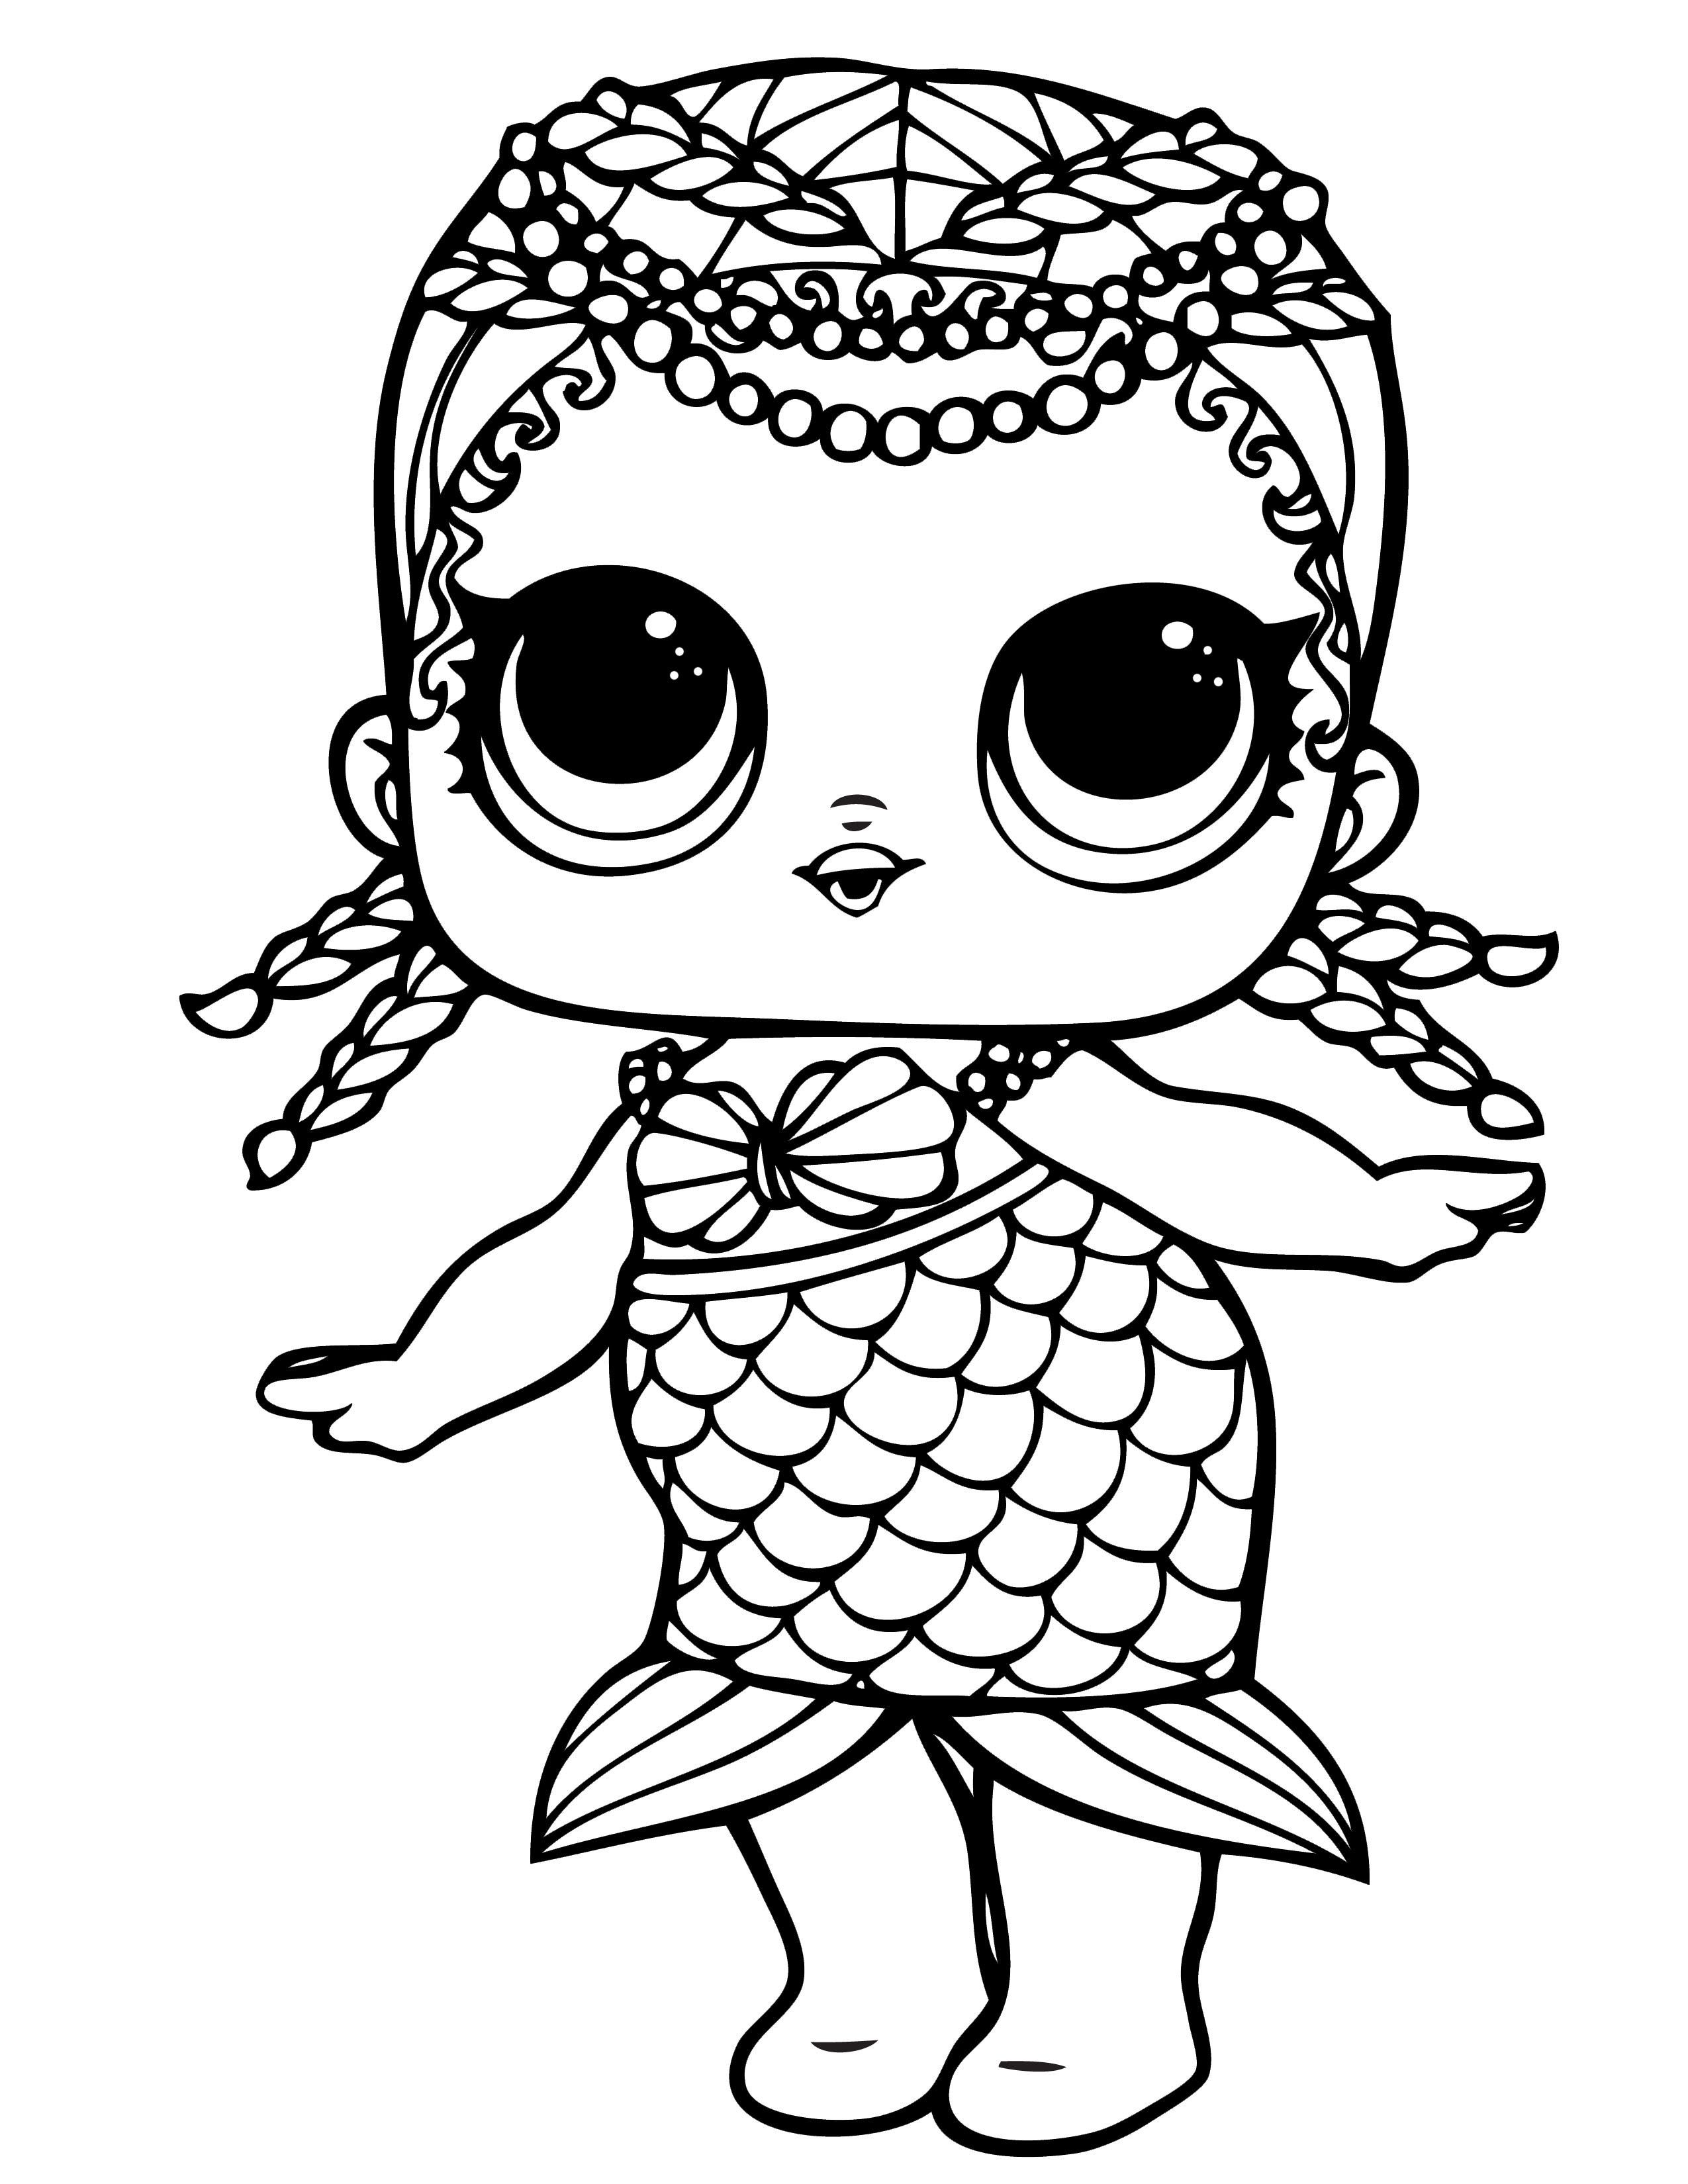 Lol Dolls Coloring Pages Best Coloring Pages For Kids Lol surprise items on amazon! lol dolls coloring pages best